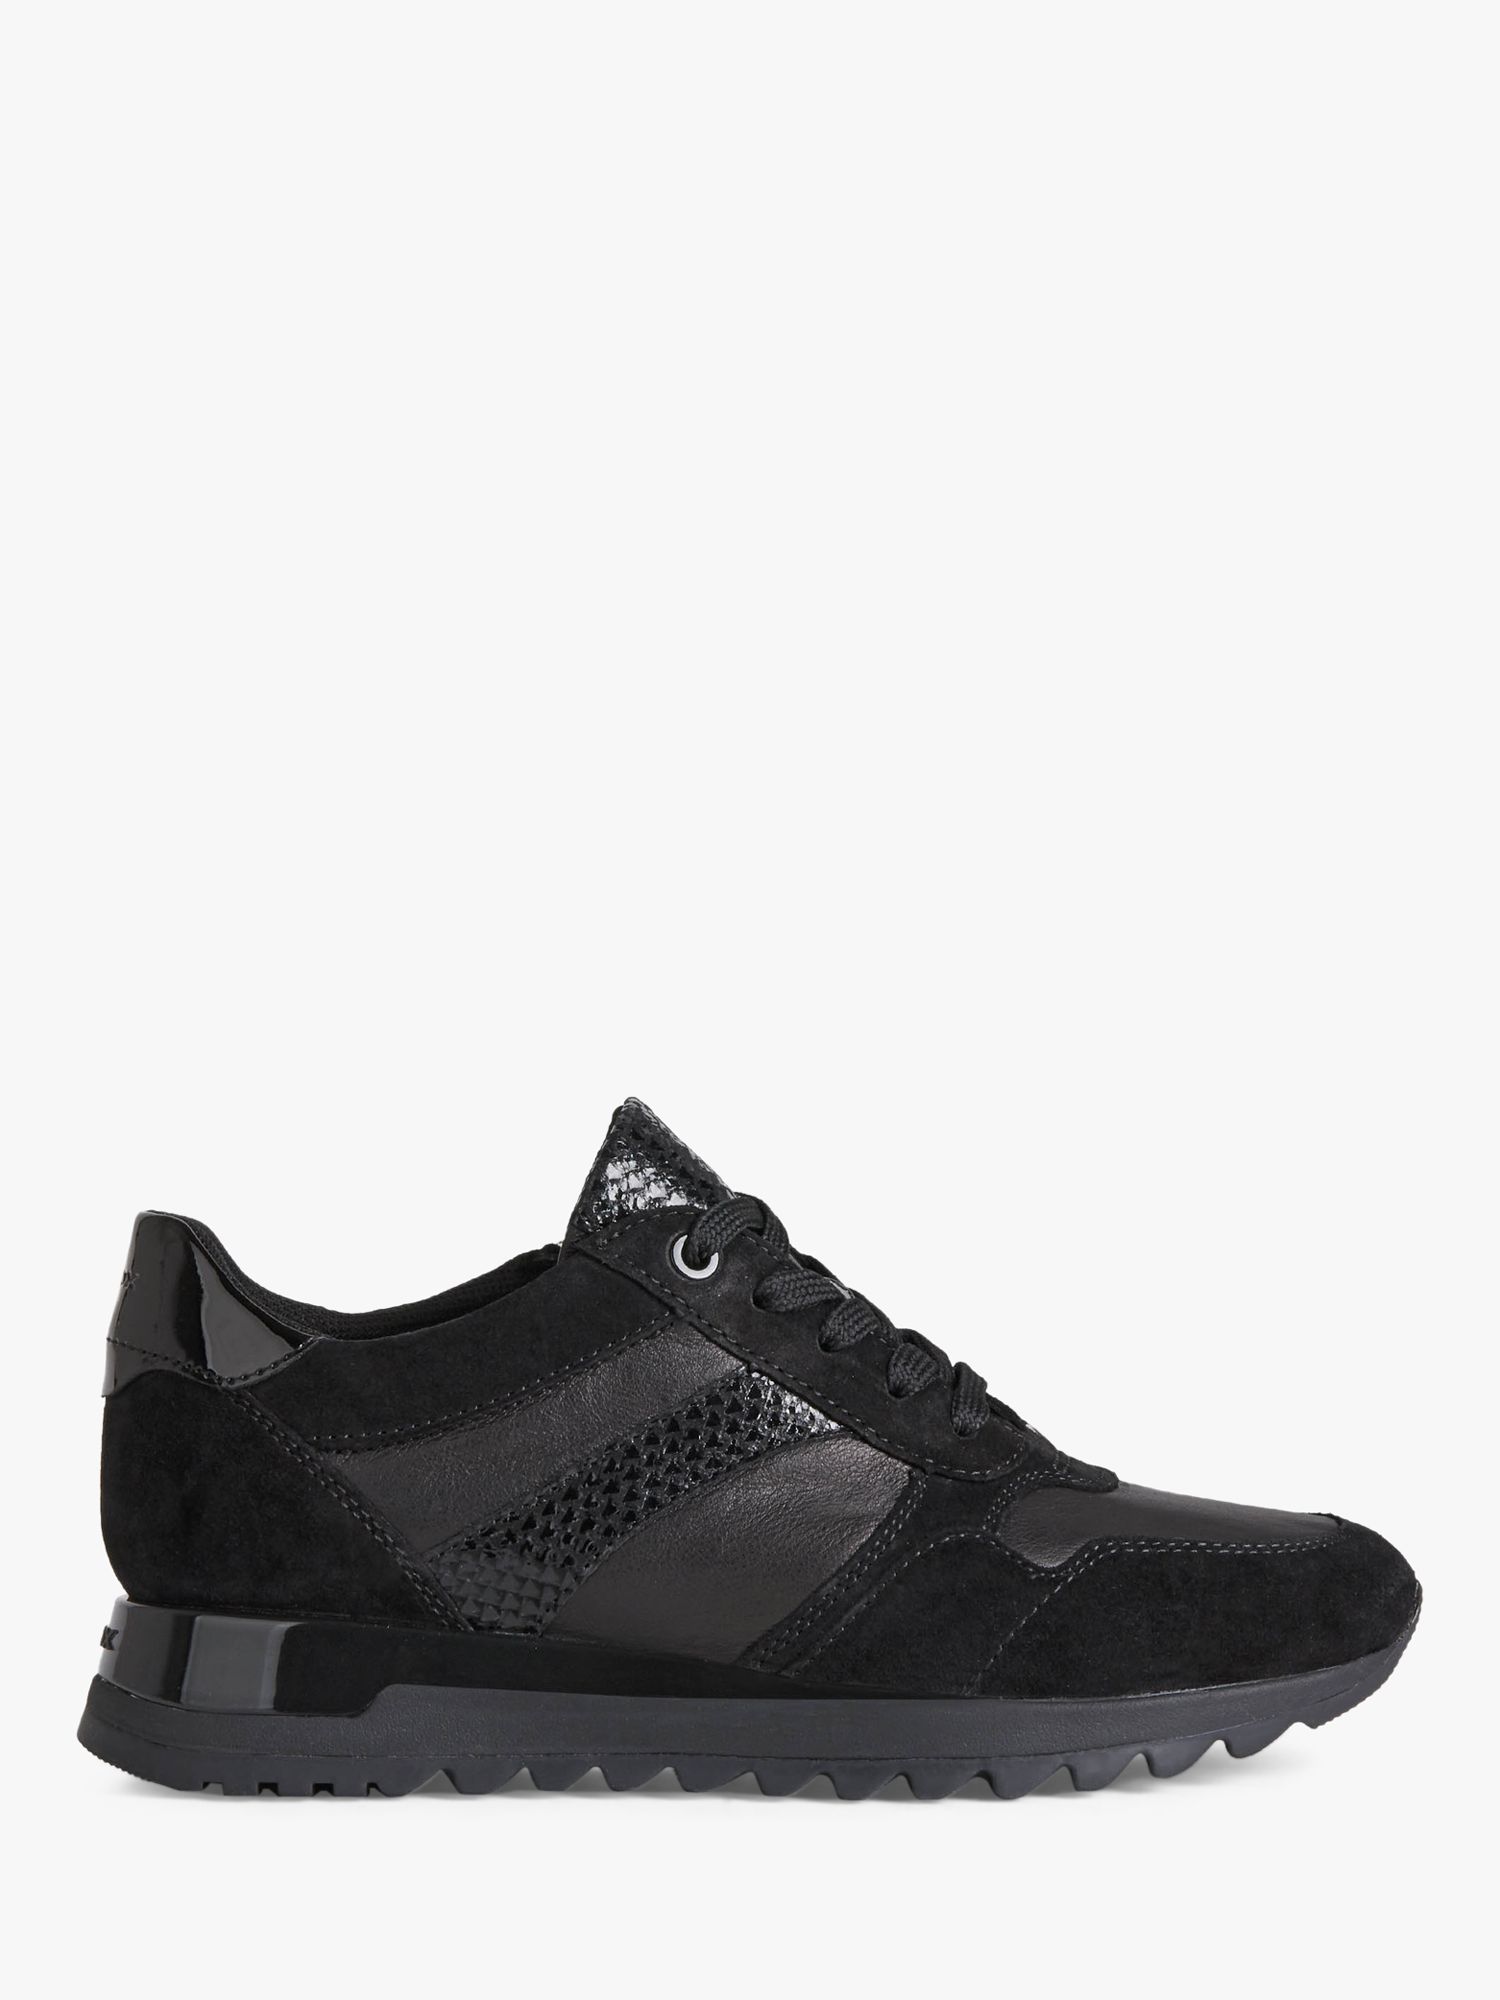 Geox Women's Tabelya Suede Lace Up Trainers, Black at John Lewis & Partners